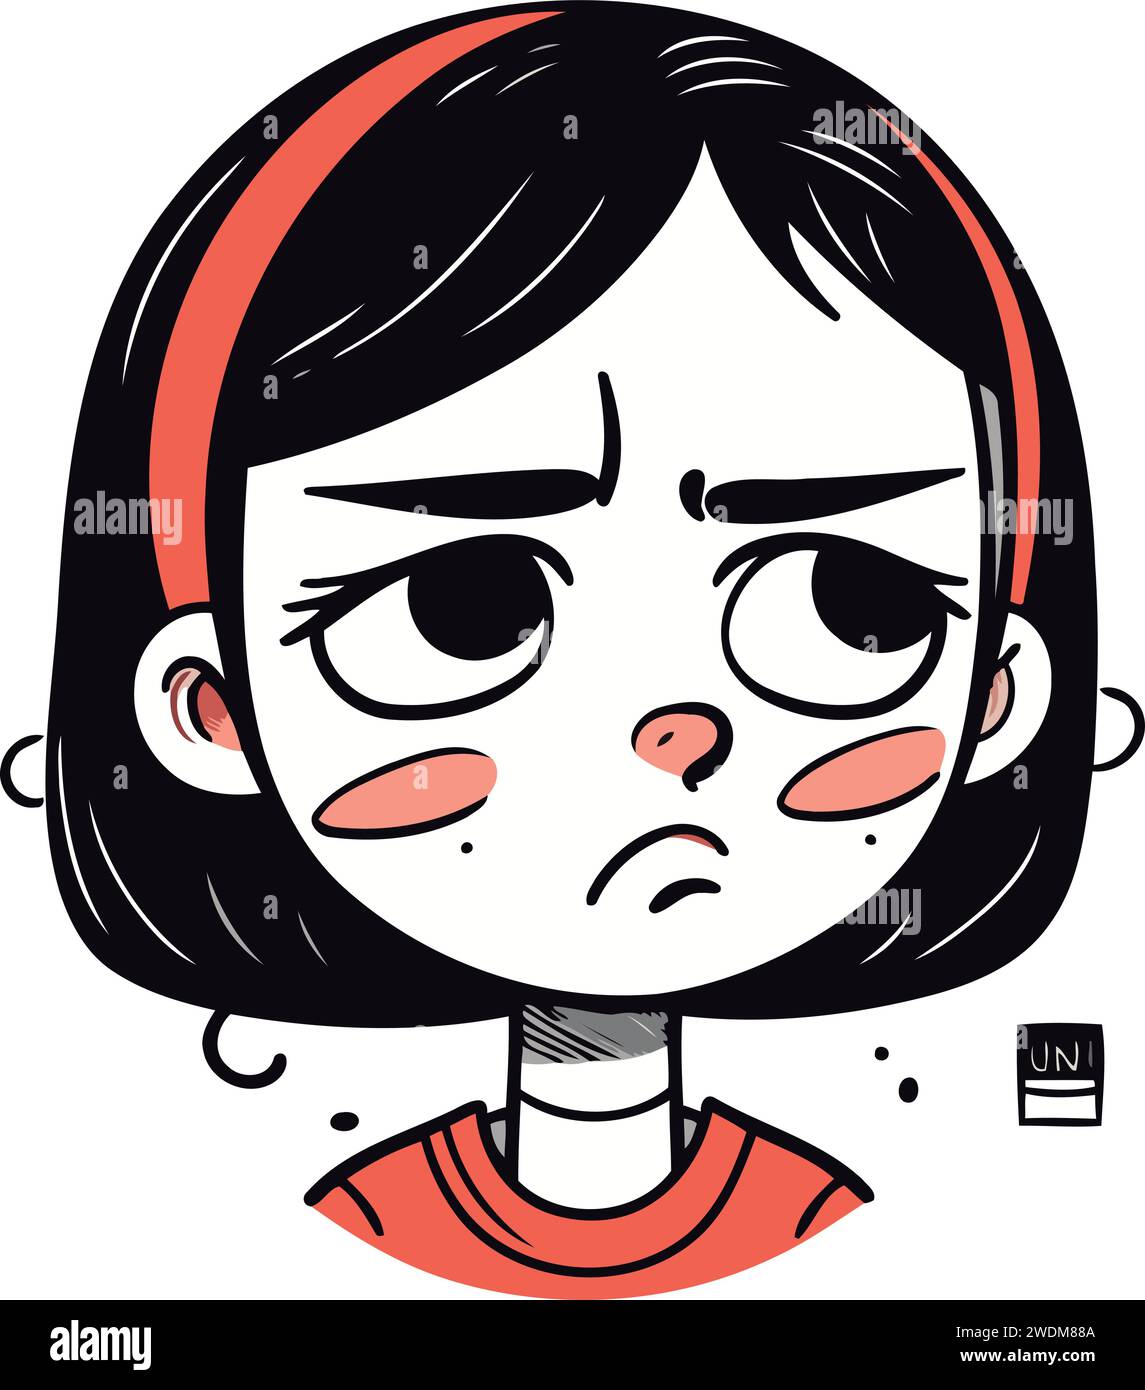 Illustration of a girl with a sad expression on her face. Stock Vector